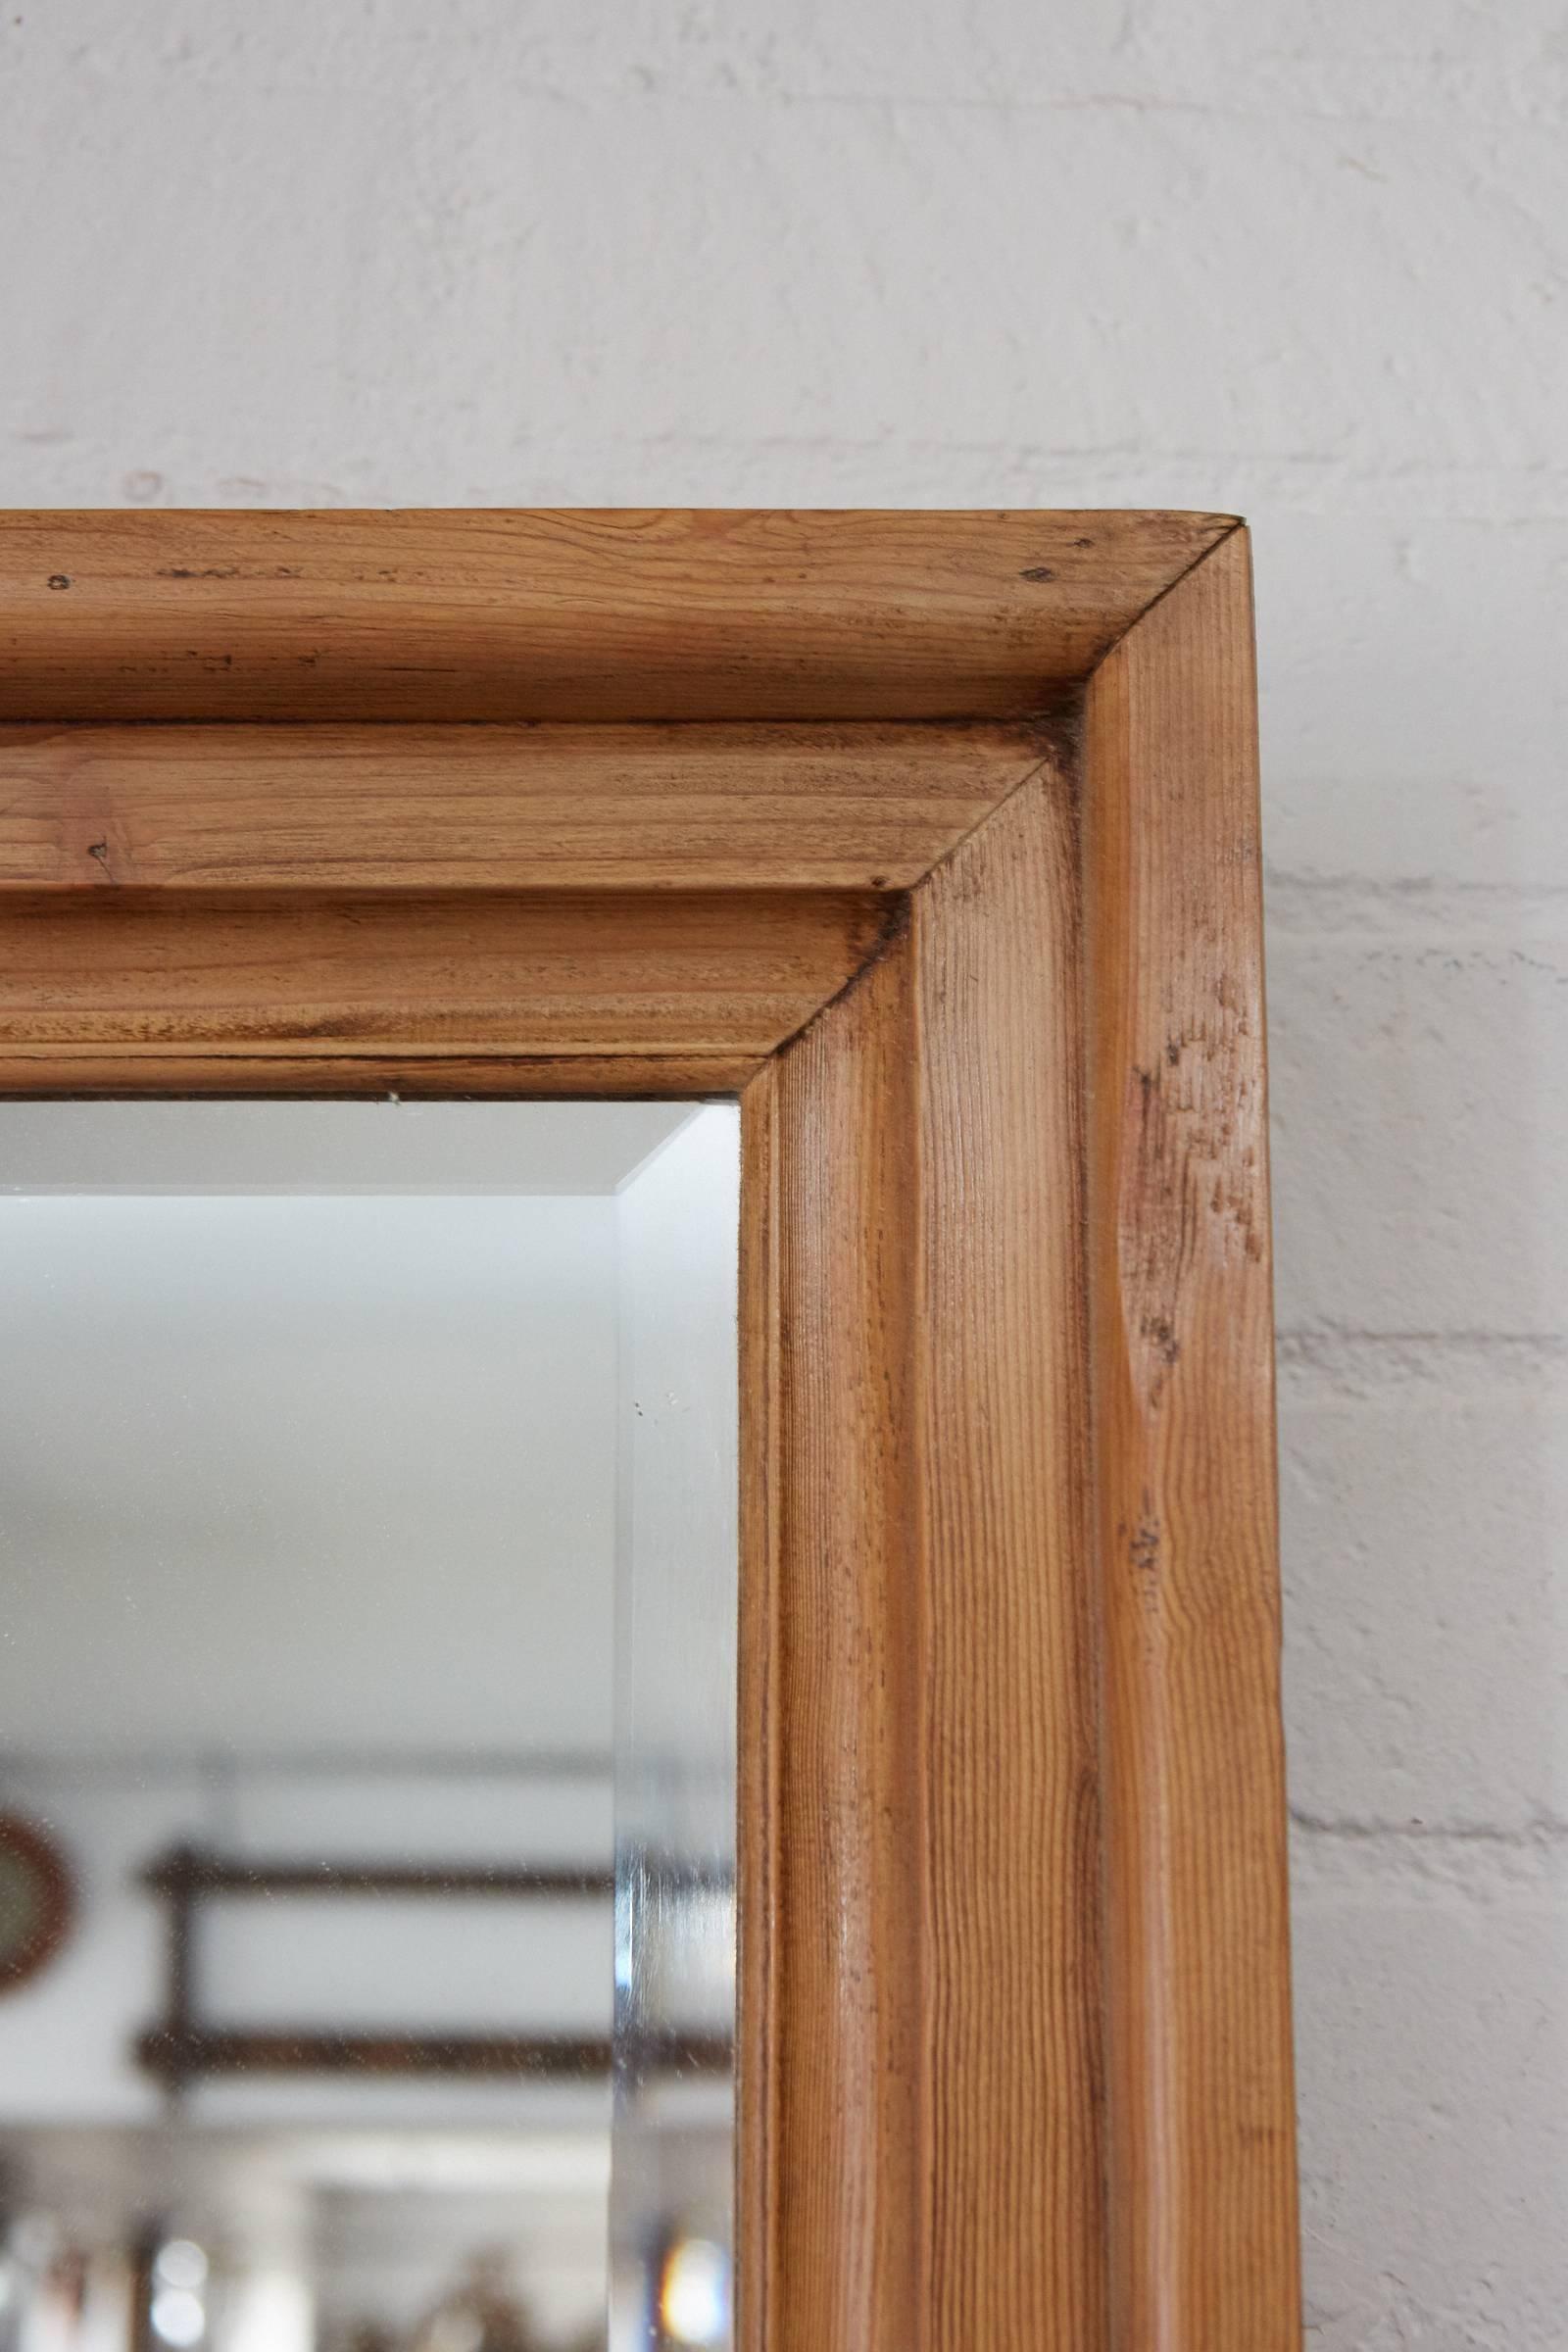 This English pine frame is over three feet tall, has a nice light color and a clear beveled mirror. This piece is well suited for a variety of settings and is ready for installation and use.